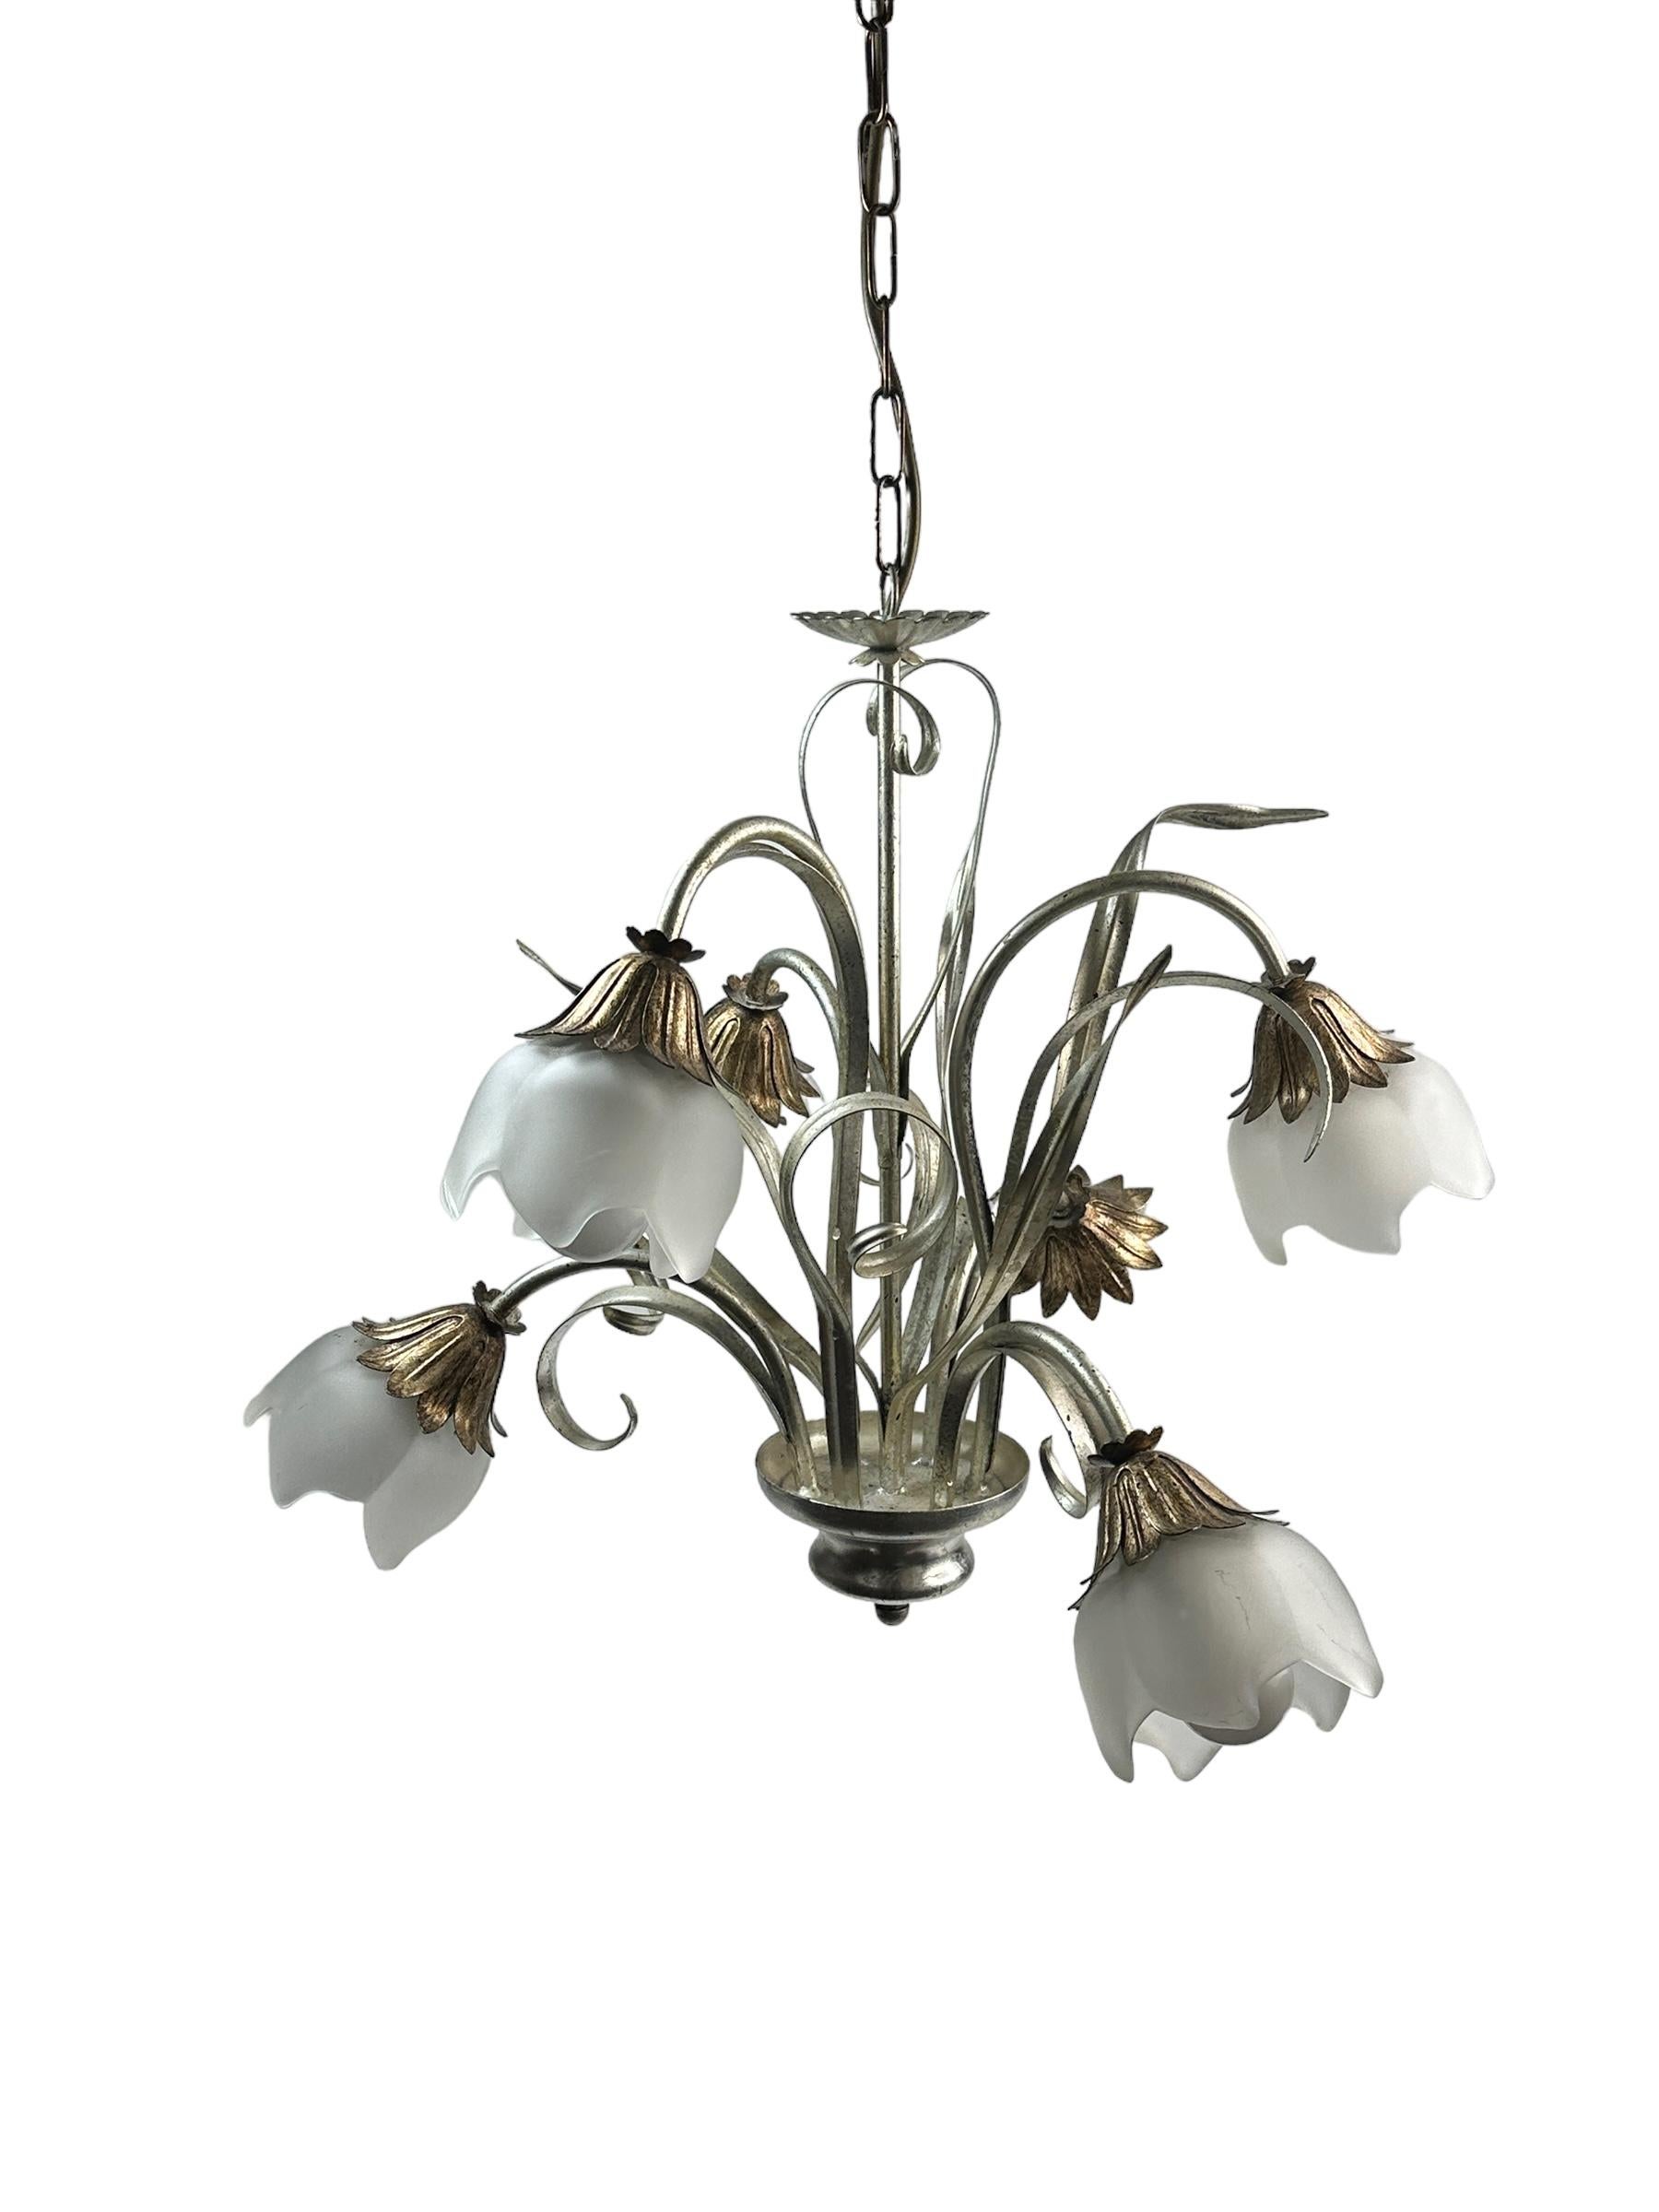 Petite Florentine style six-light chandelier. Functions as is with six E14 / 110 Volt light bulbs. Can take up to 40 Watts each bulb. Beautiful silvered metal chandelier. Chain with canopy approx. 18 inch high.
It gives the room a beautiful warm